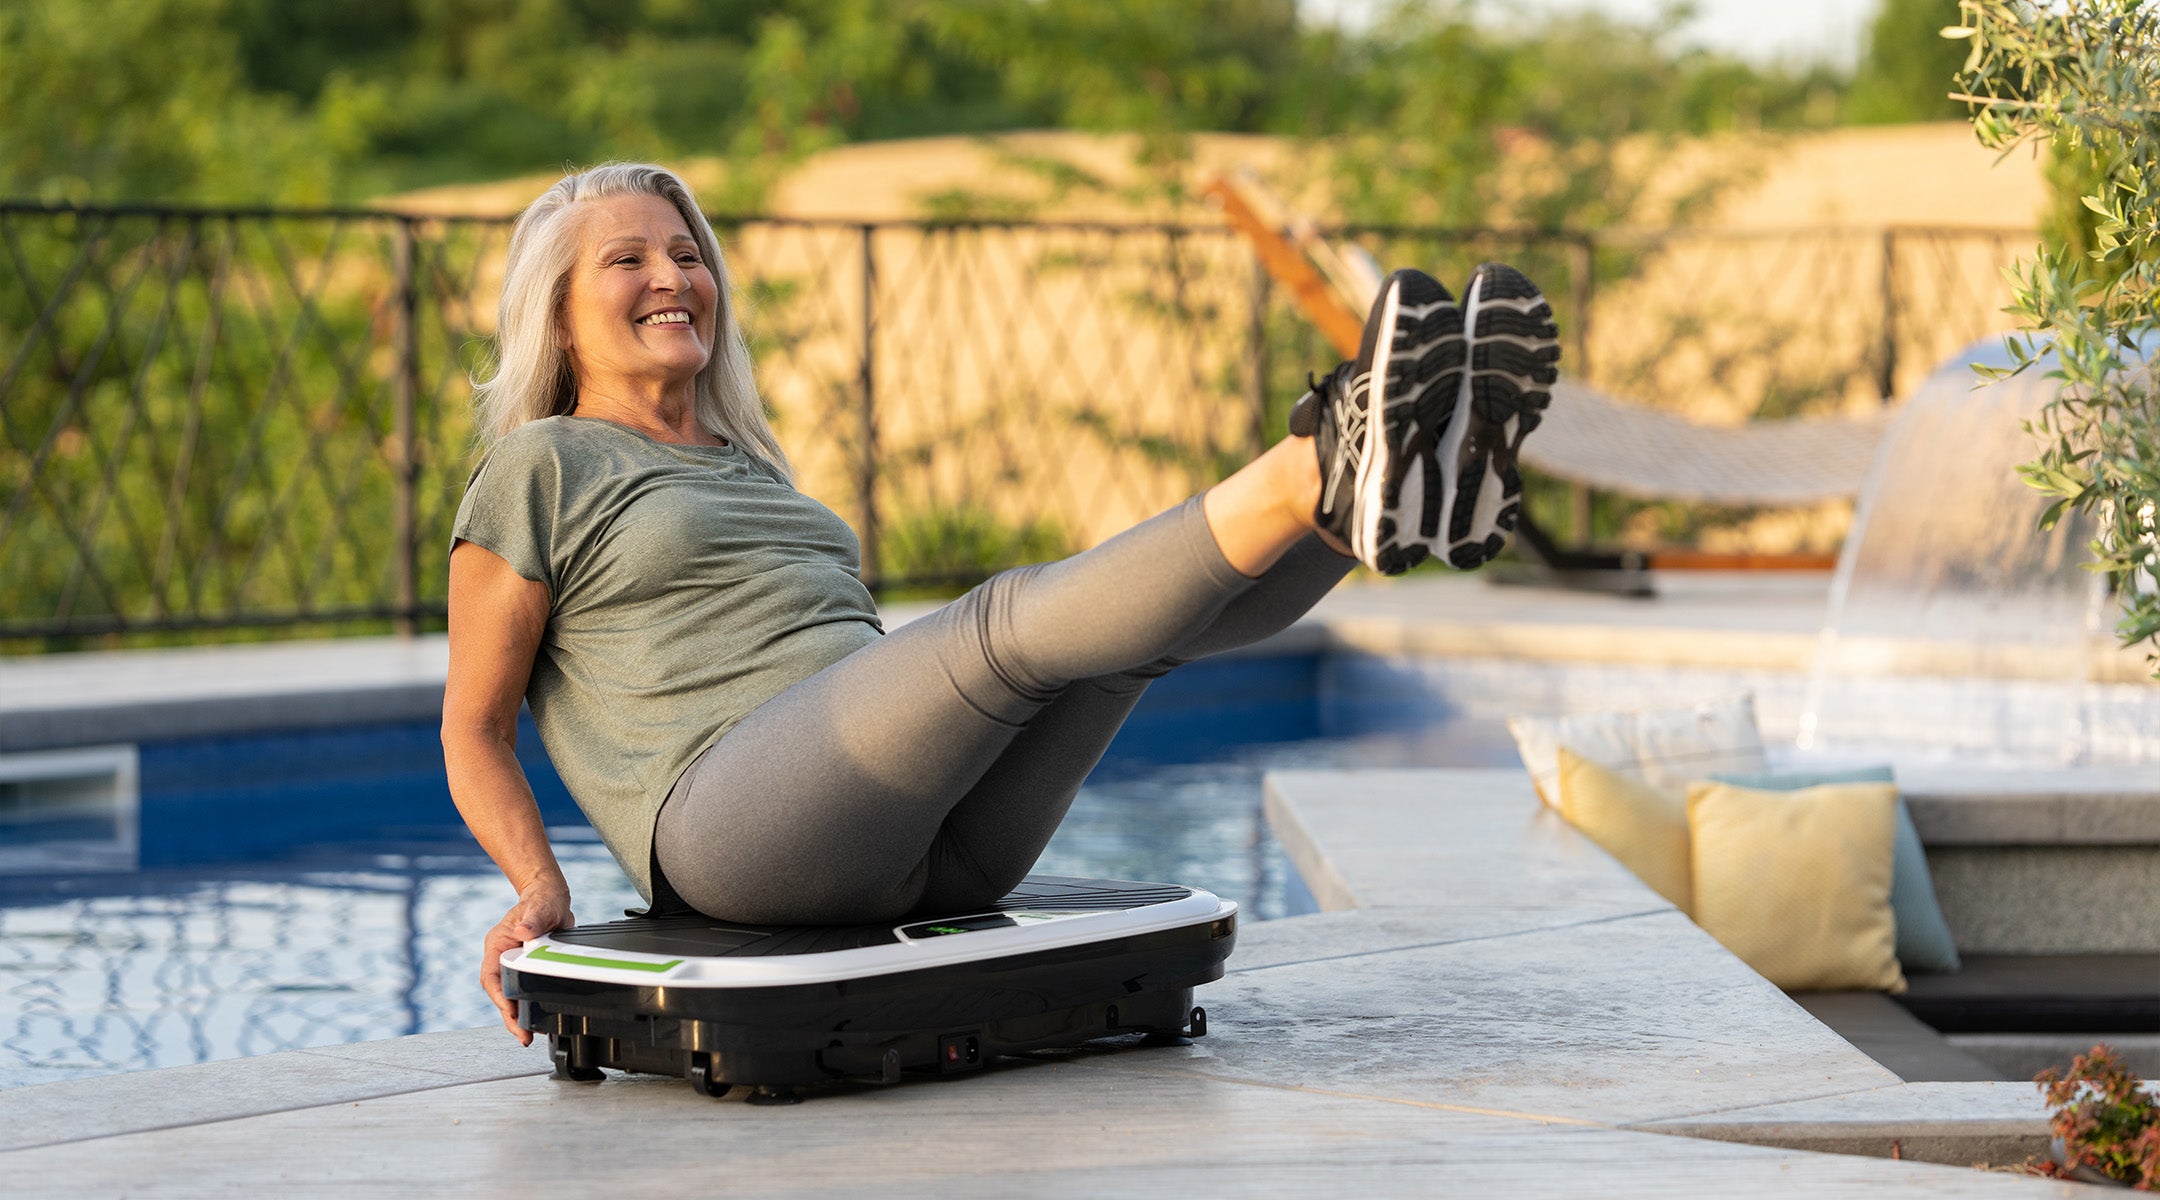 middle aged woman performing vibration training outdoors